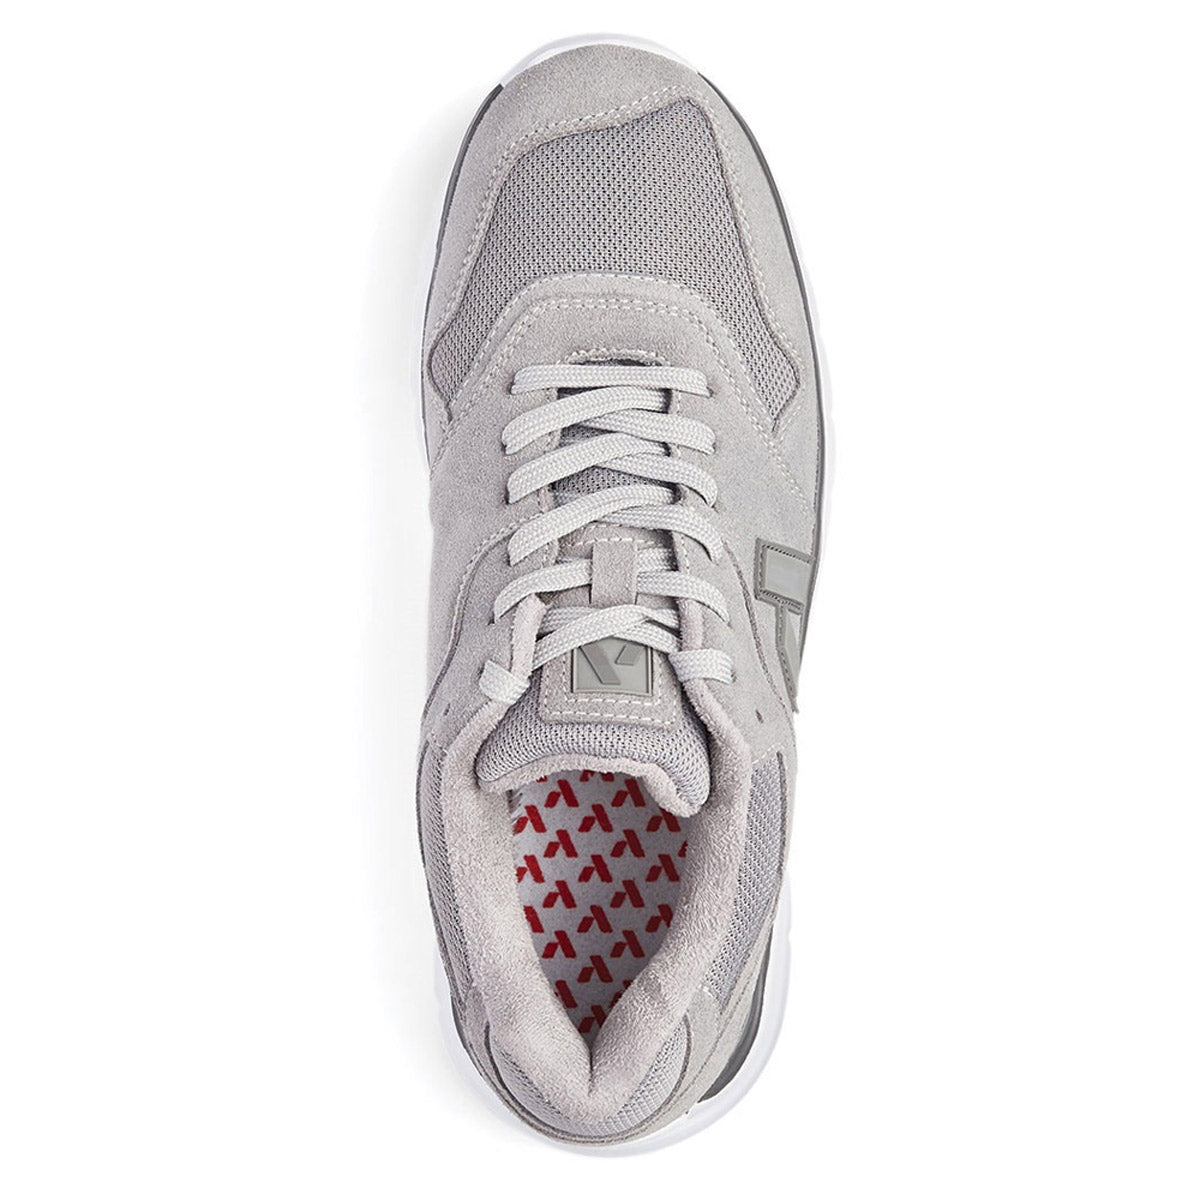 Top view of an Anodyne grey sport trainer with white laces, featuring a mesh fabric and a red patterned insole.